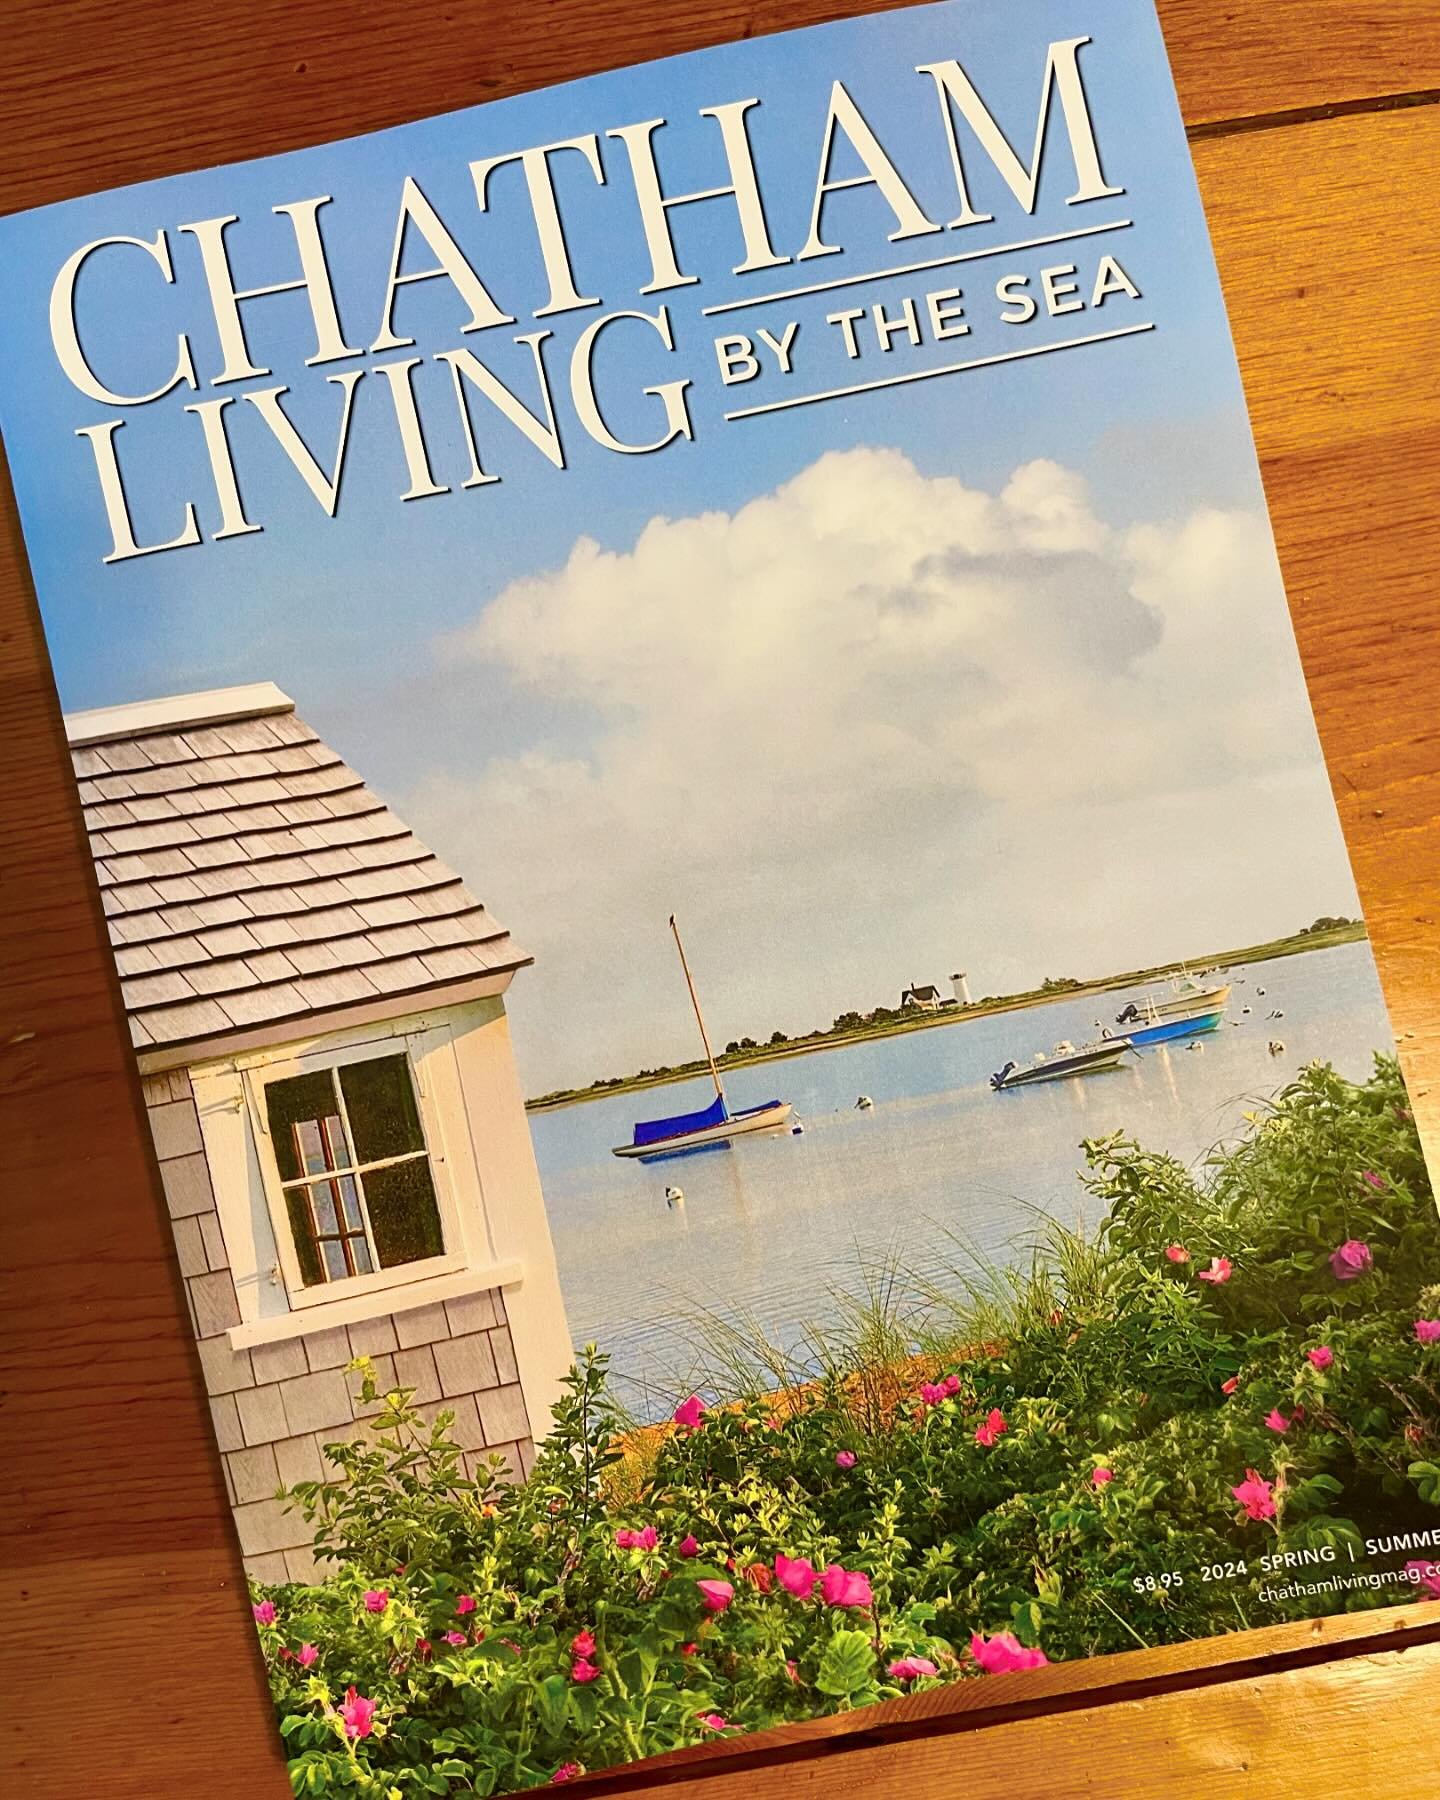 The new iissue of Chatham Living By the Sea magazine&hellip; we stopped by the launch party last evening and this issue is full of great stories and photos &hellip;including one of an engagement aboard Hannah last summer!

From the story: &ldquo;&lsq